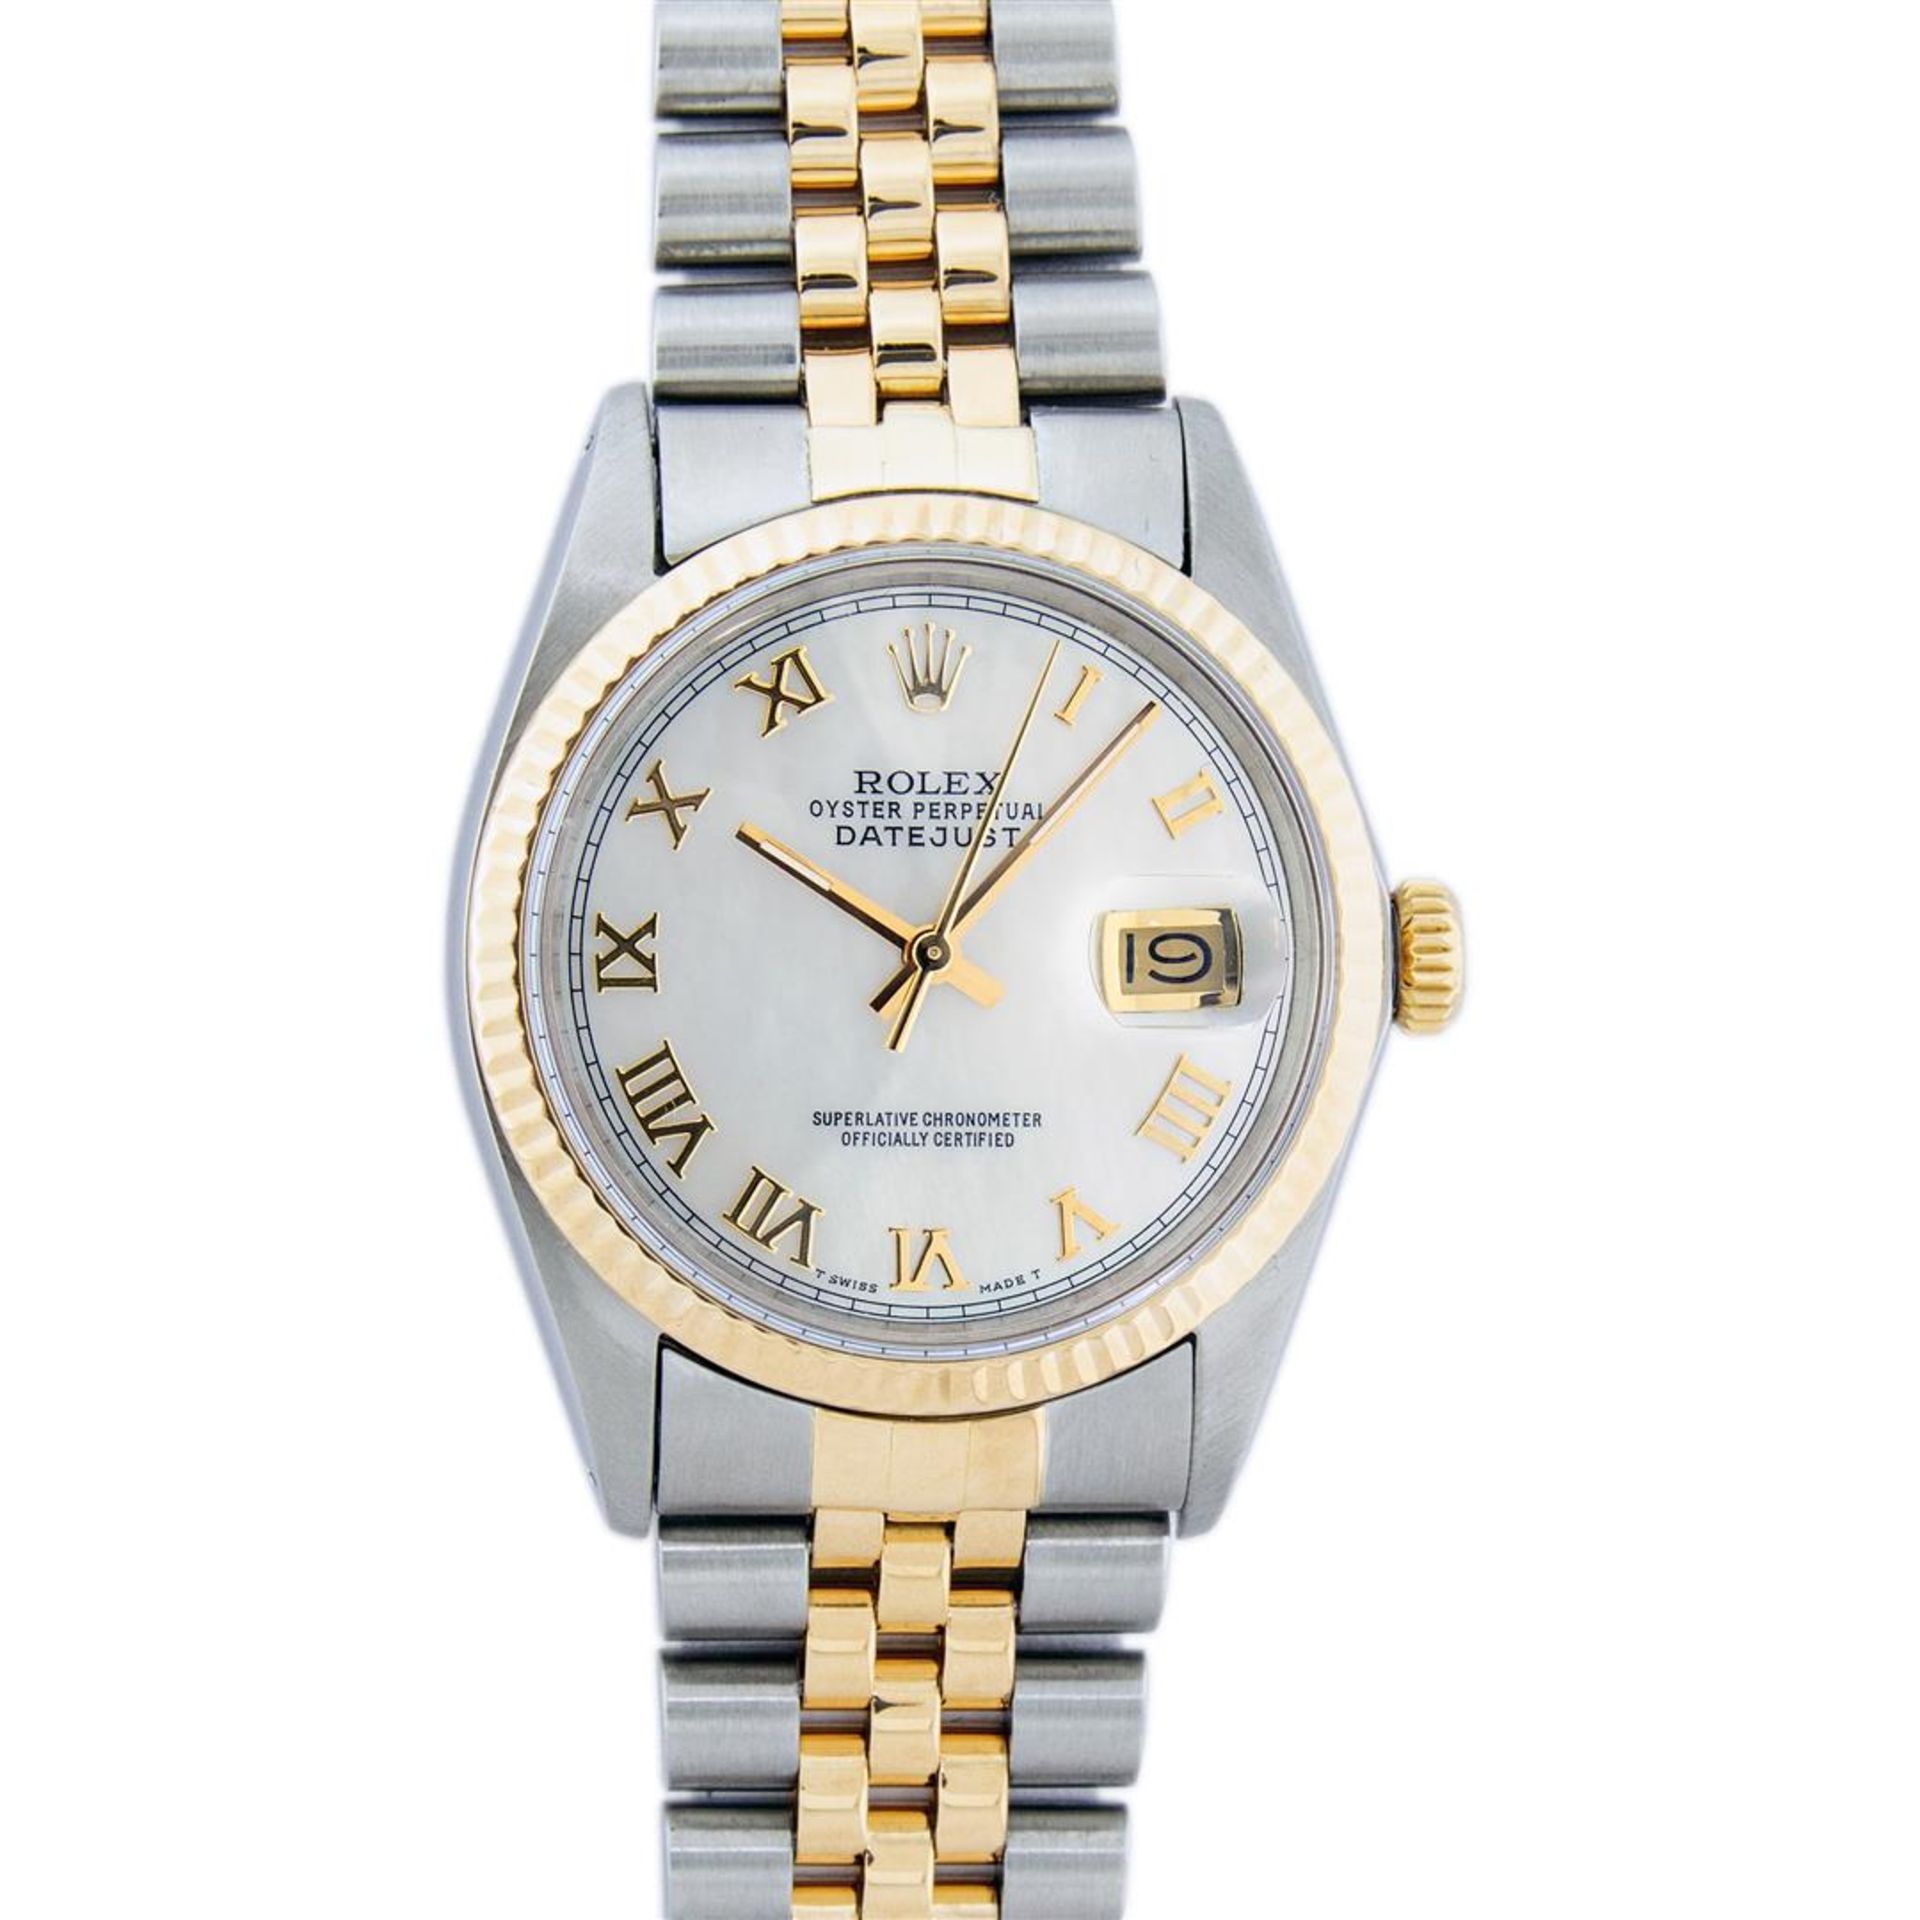 Rolex Mens 2 Tone Mother Of Pearl Roman Datejust Wristwatch - Image 5 of 9